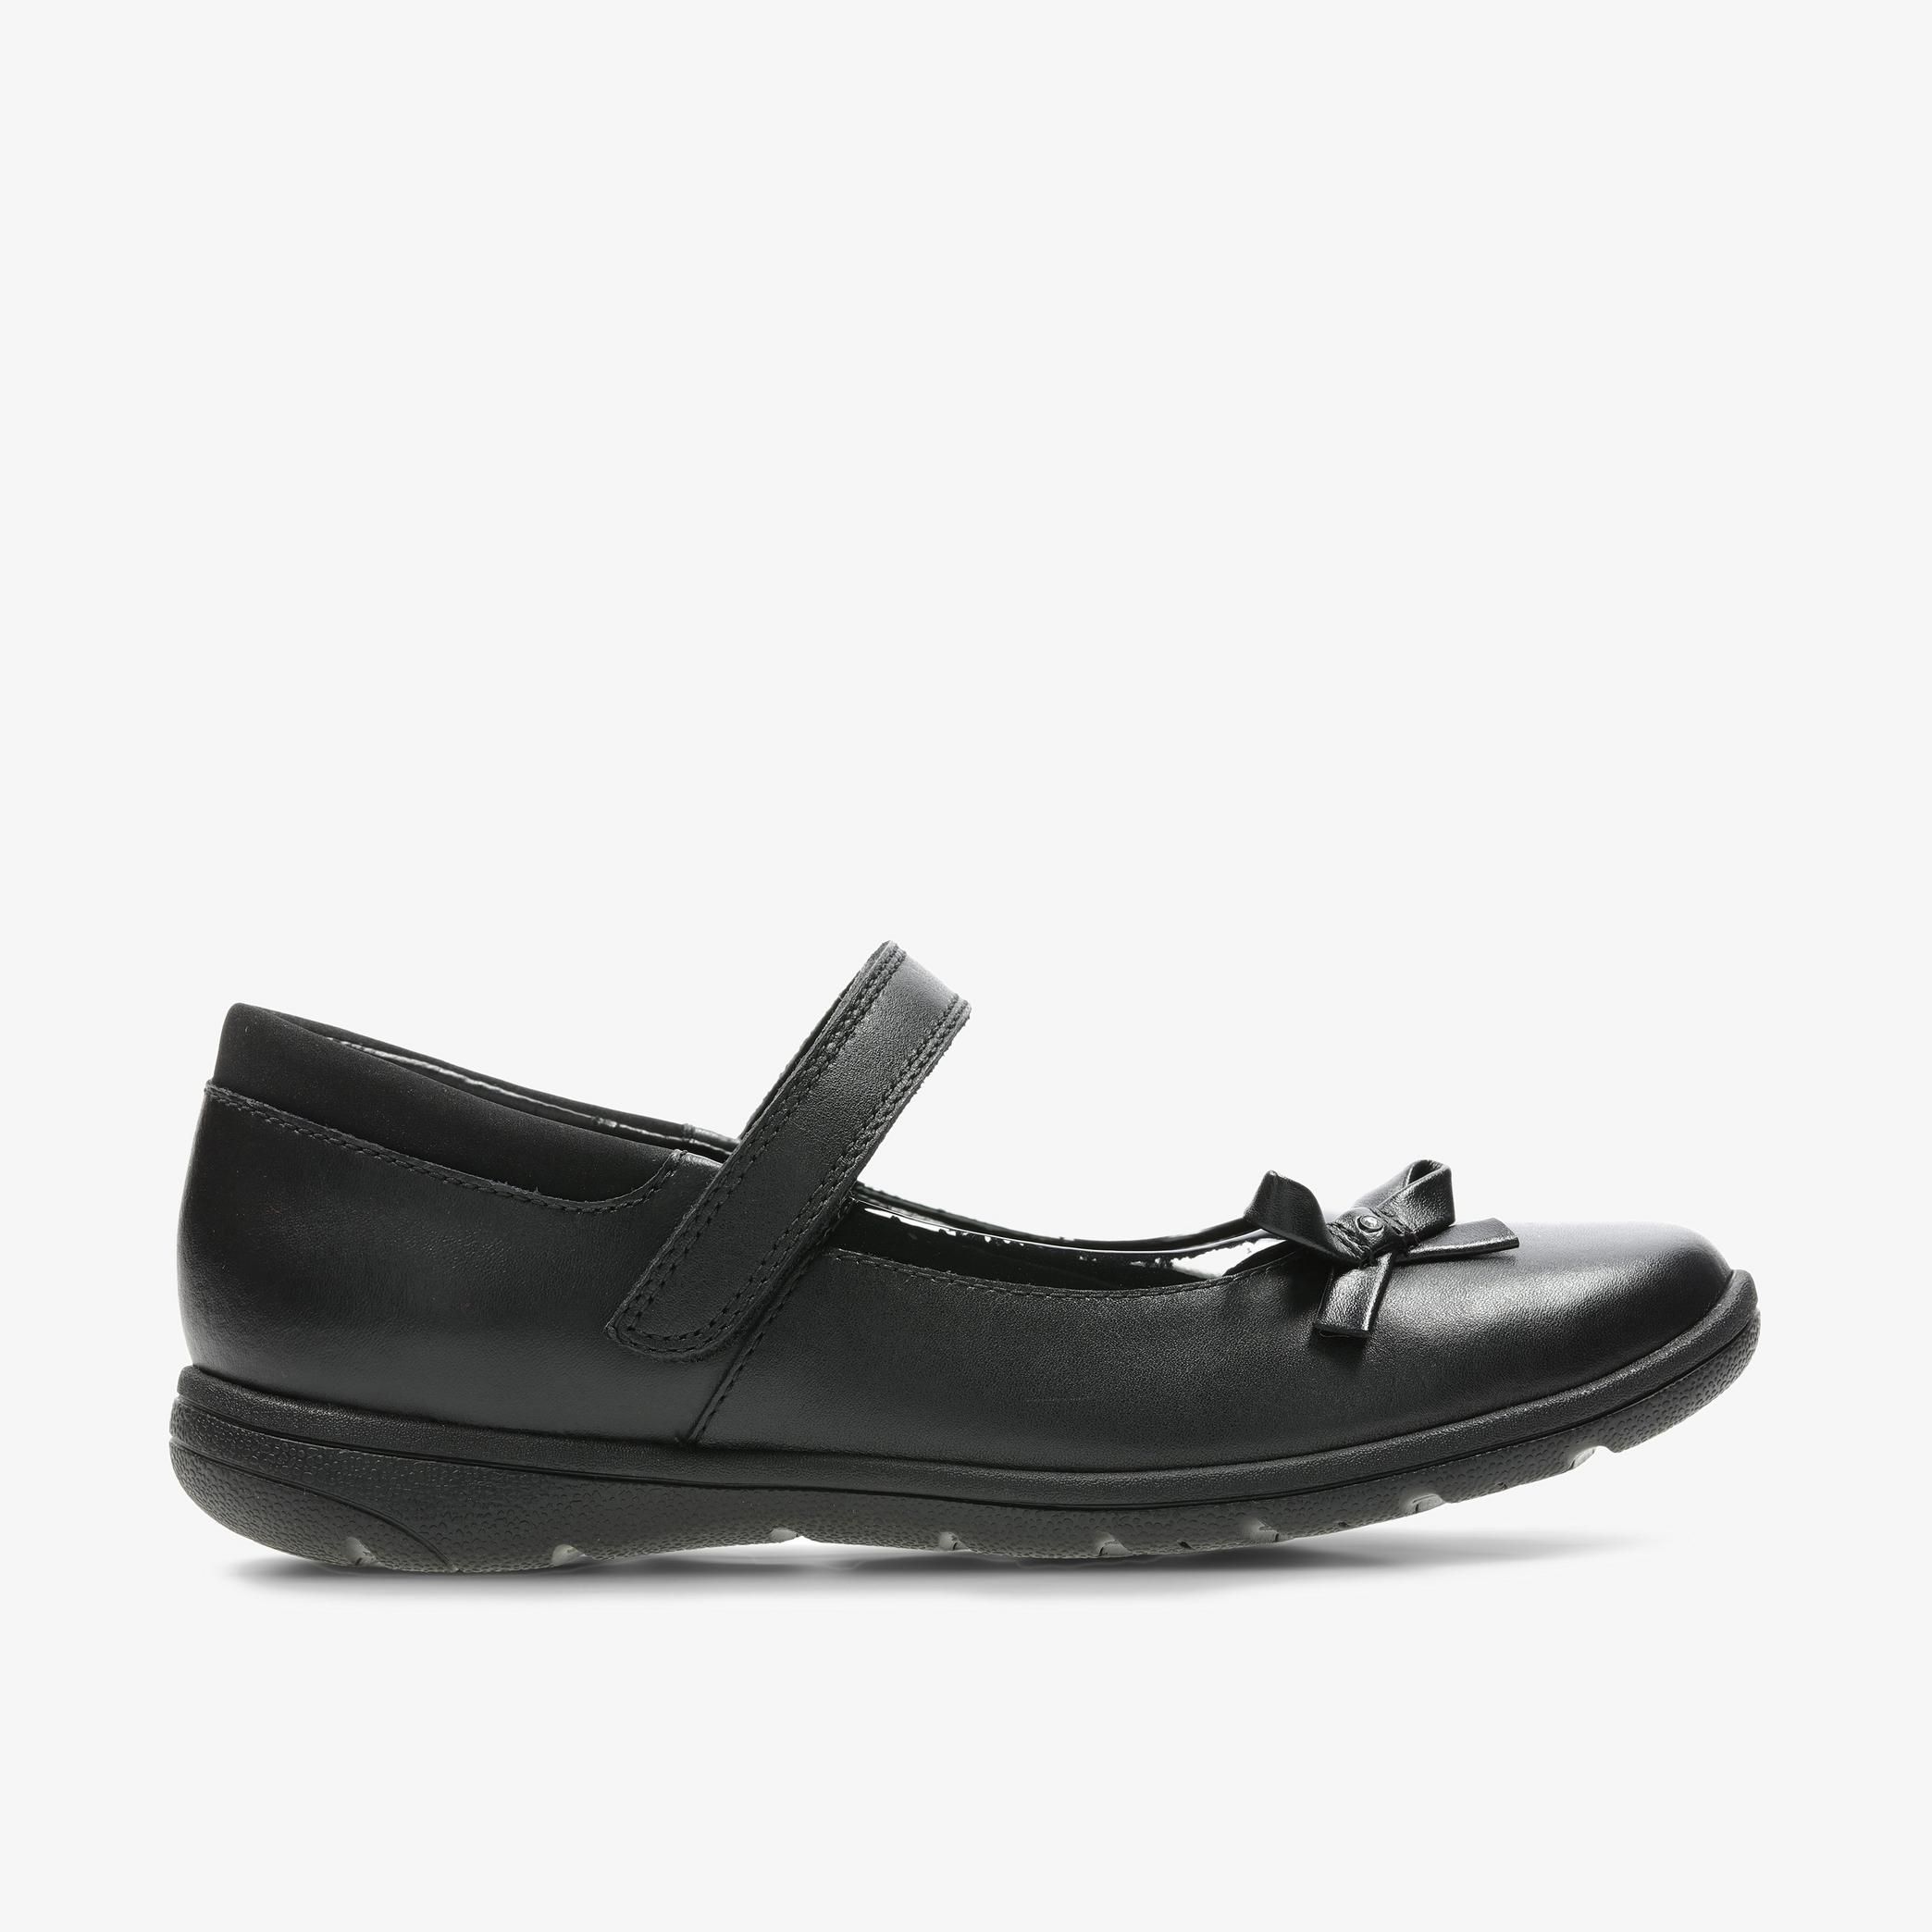 Venture Star Youth Black Leather Shoes, view 1 of 6